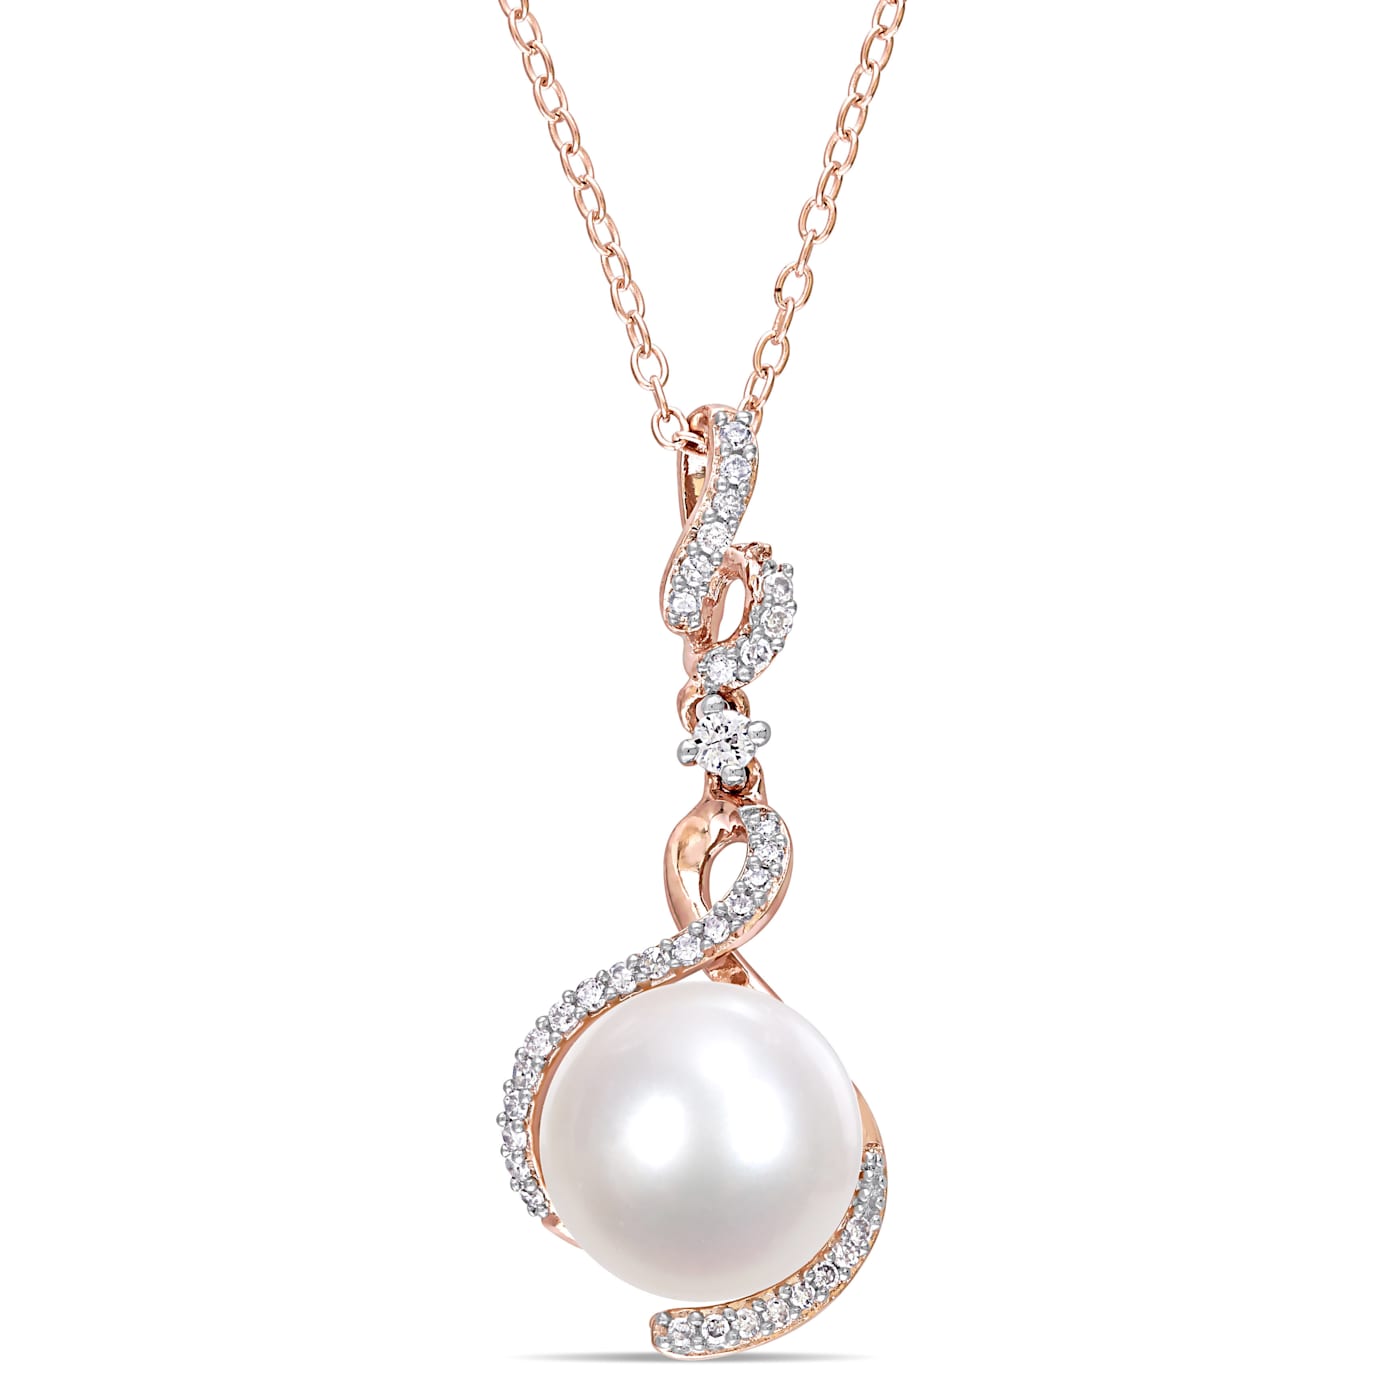 10-10.5MM Freshwater Cultured Pearl and 1/6 CT TW Diamond Pendant